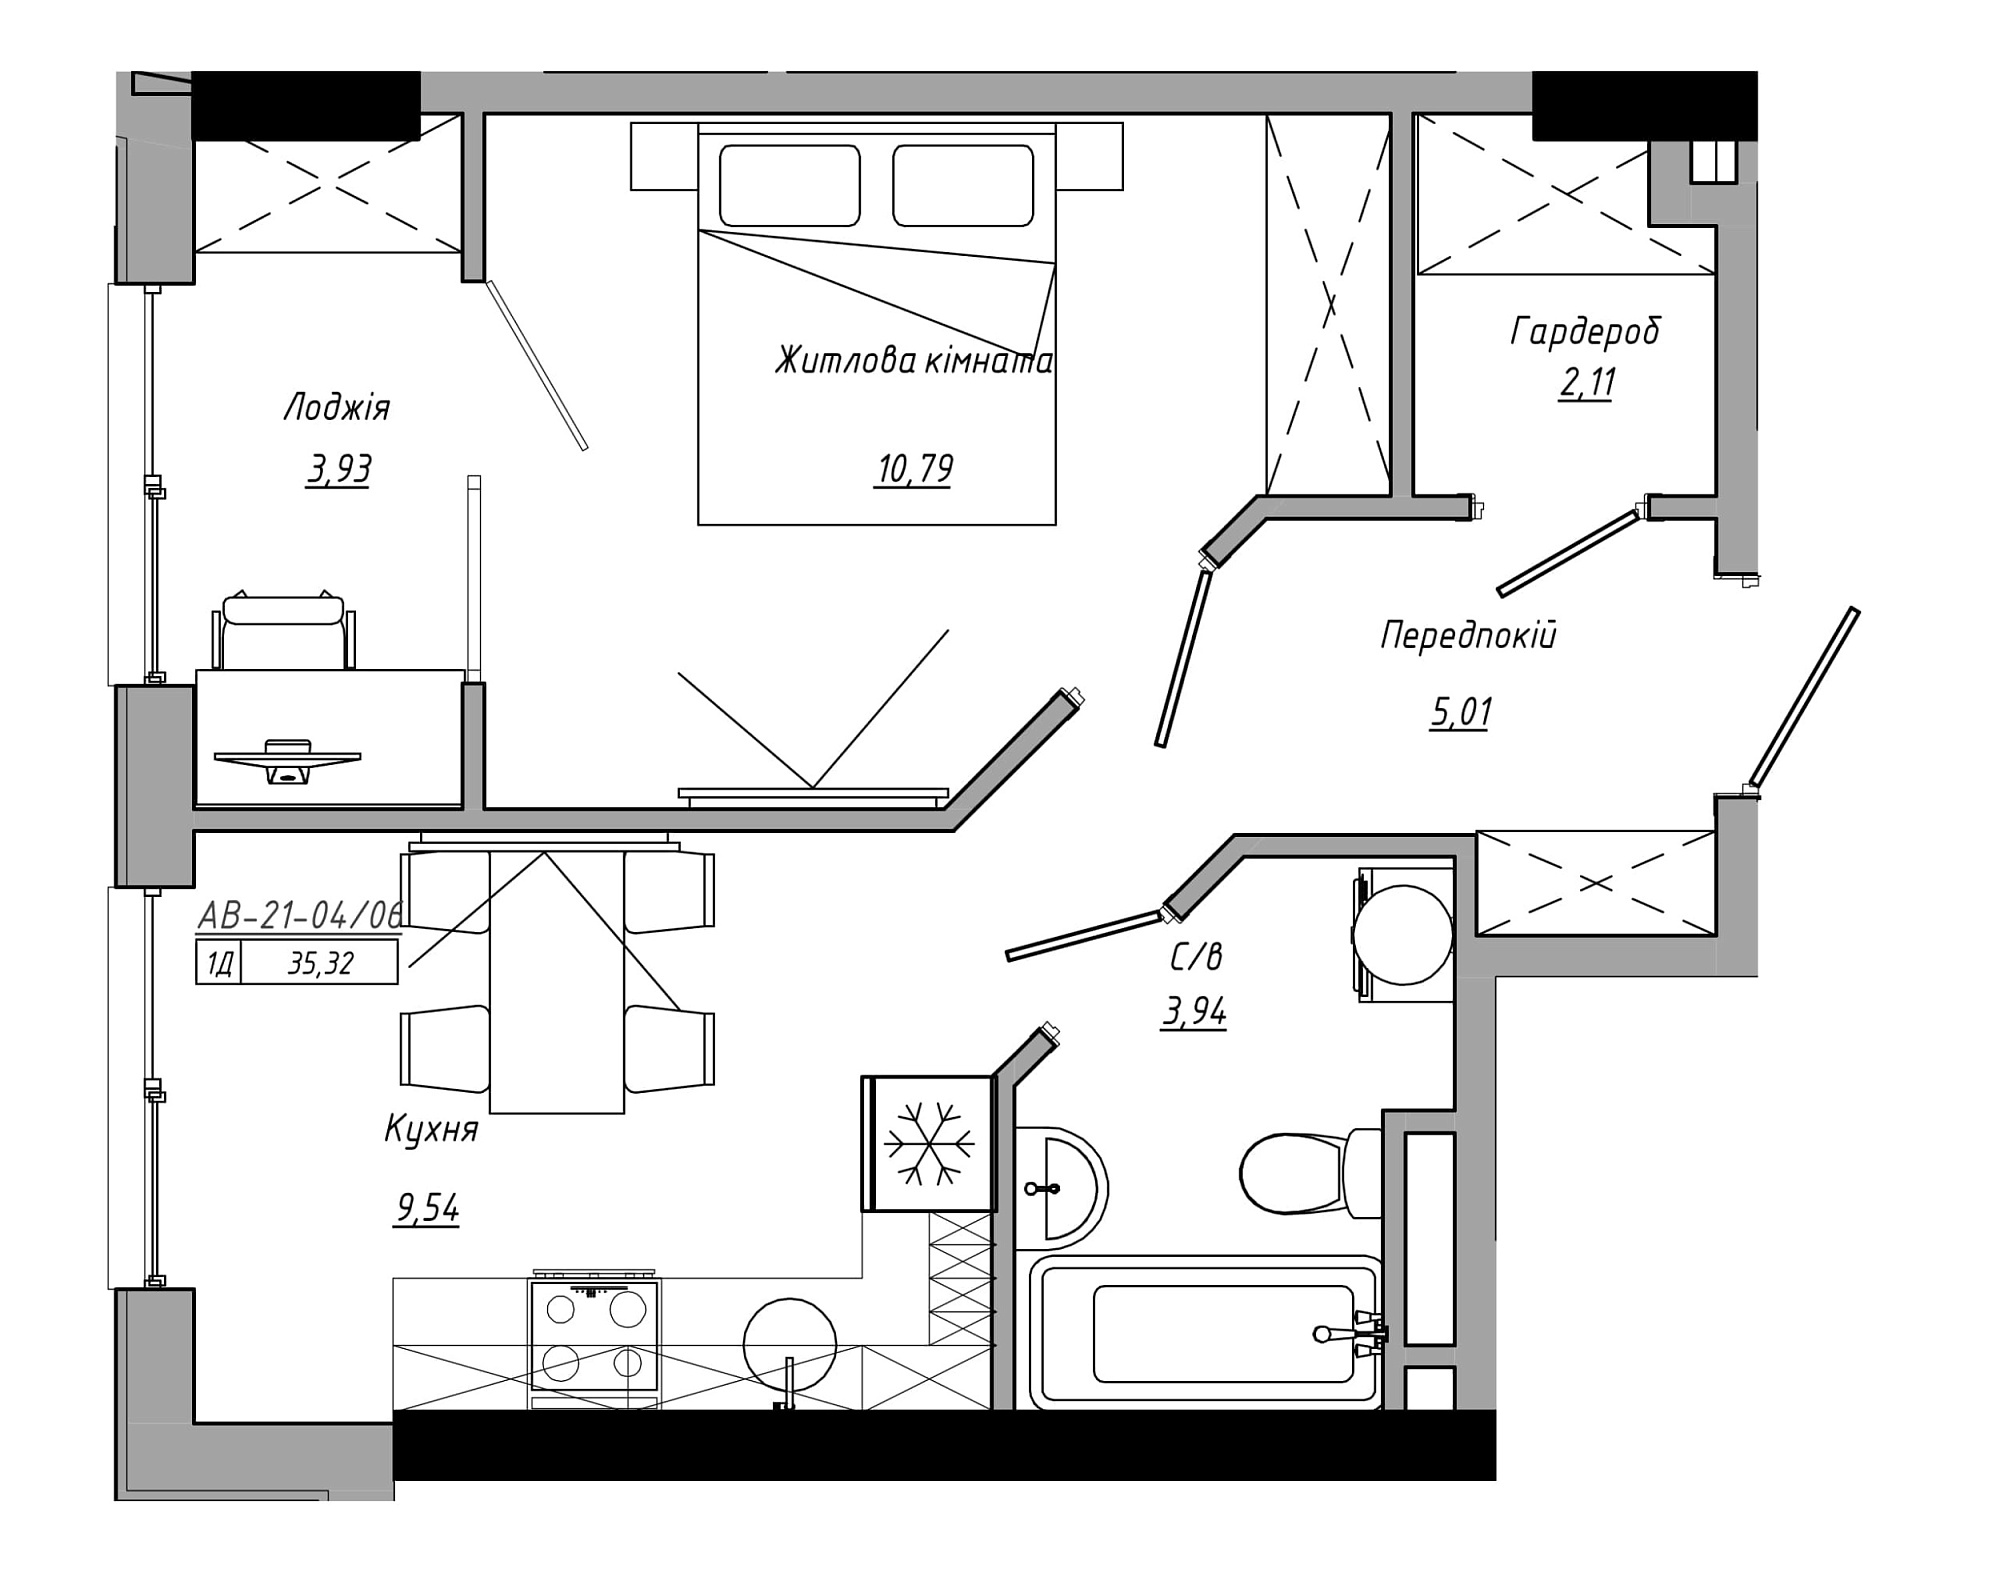 Planning 1-rm flats area 35.32m2, AB-21-04/00006.